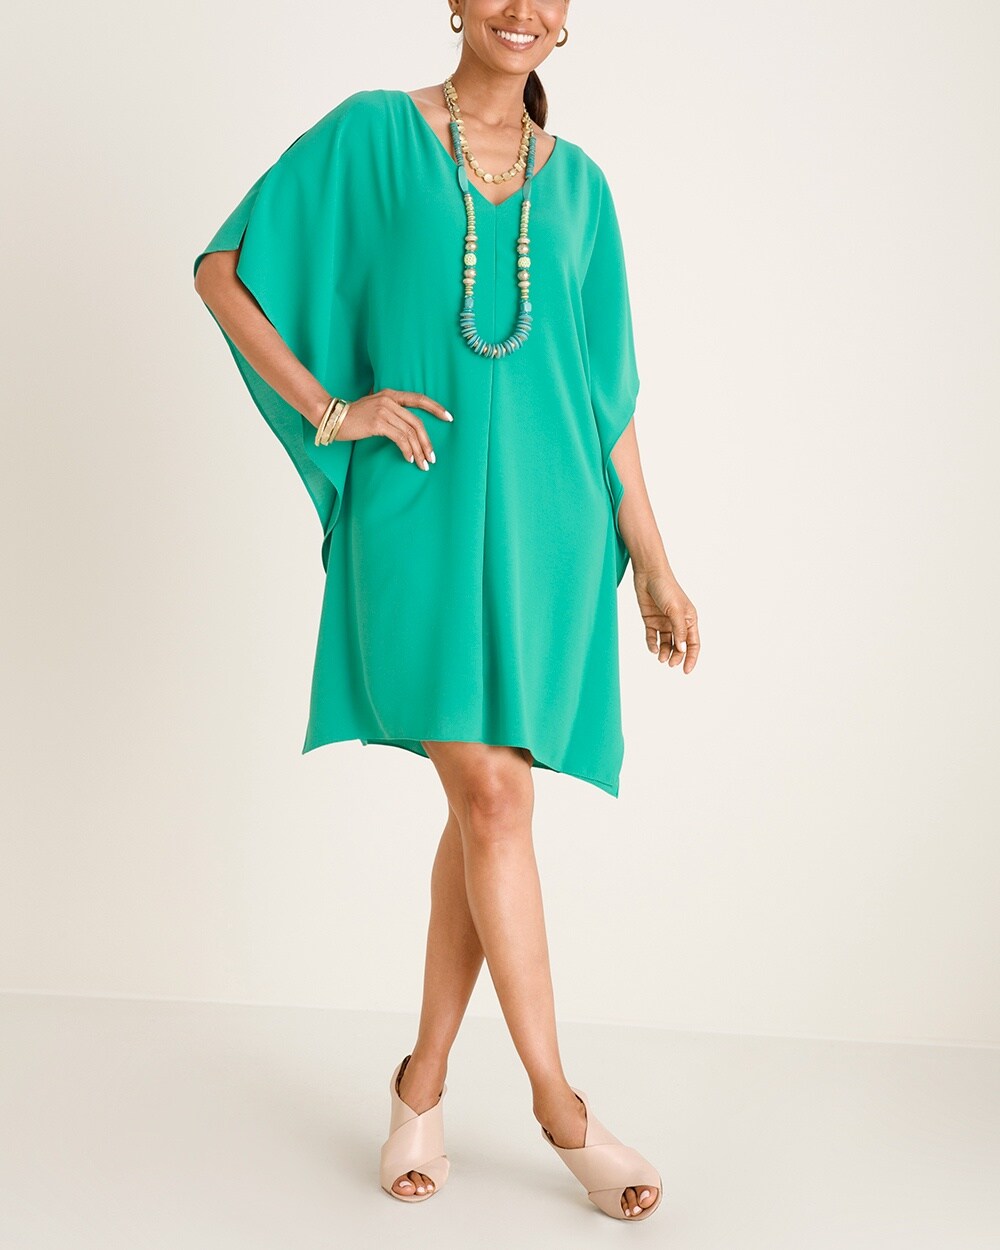 Adrianna Papell Teal Cold-Shoulder Dress